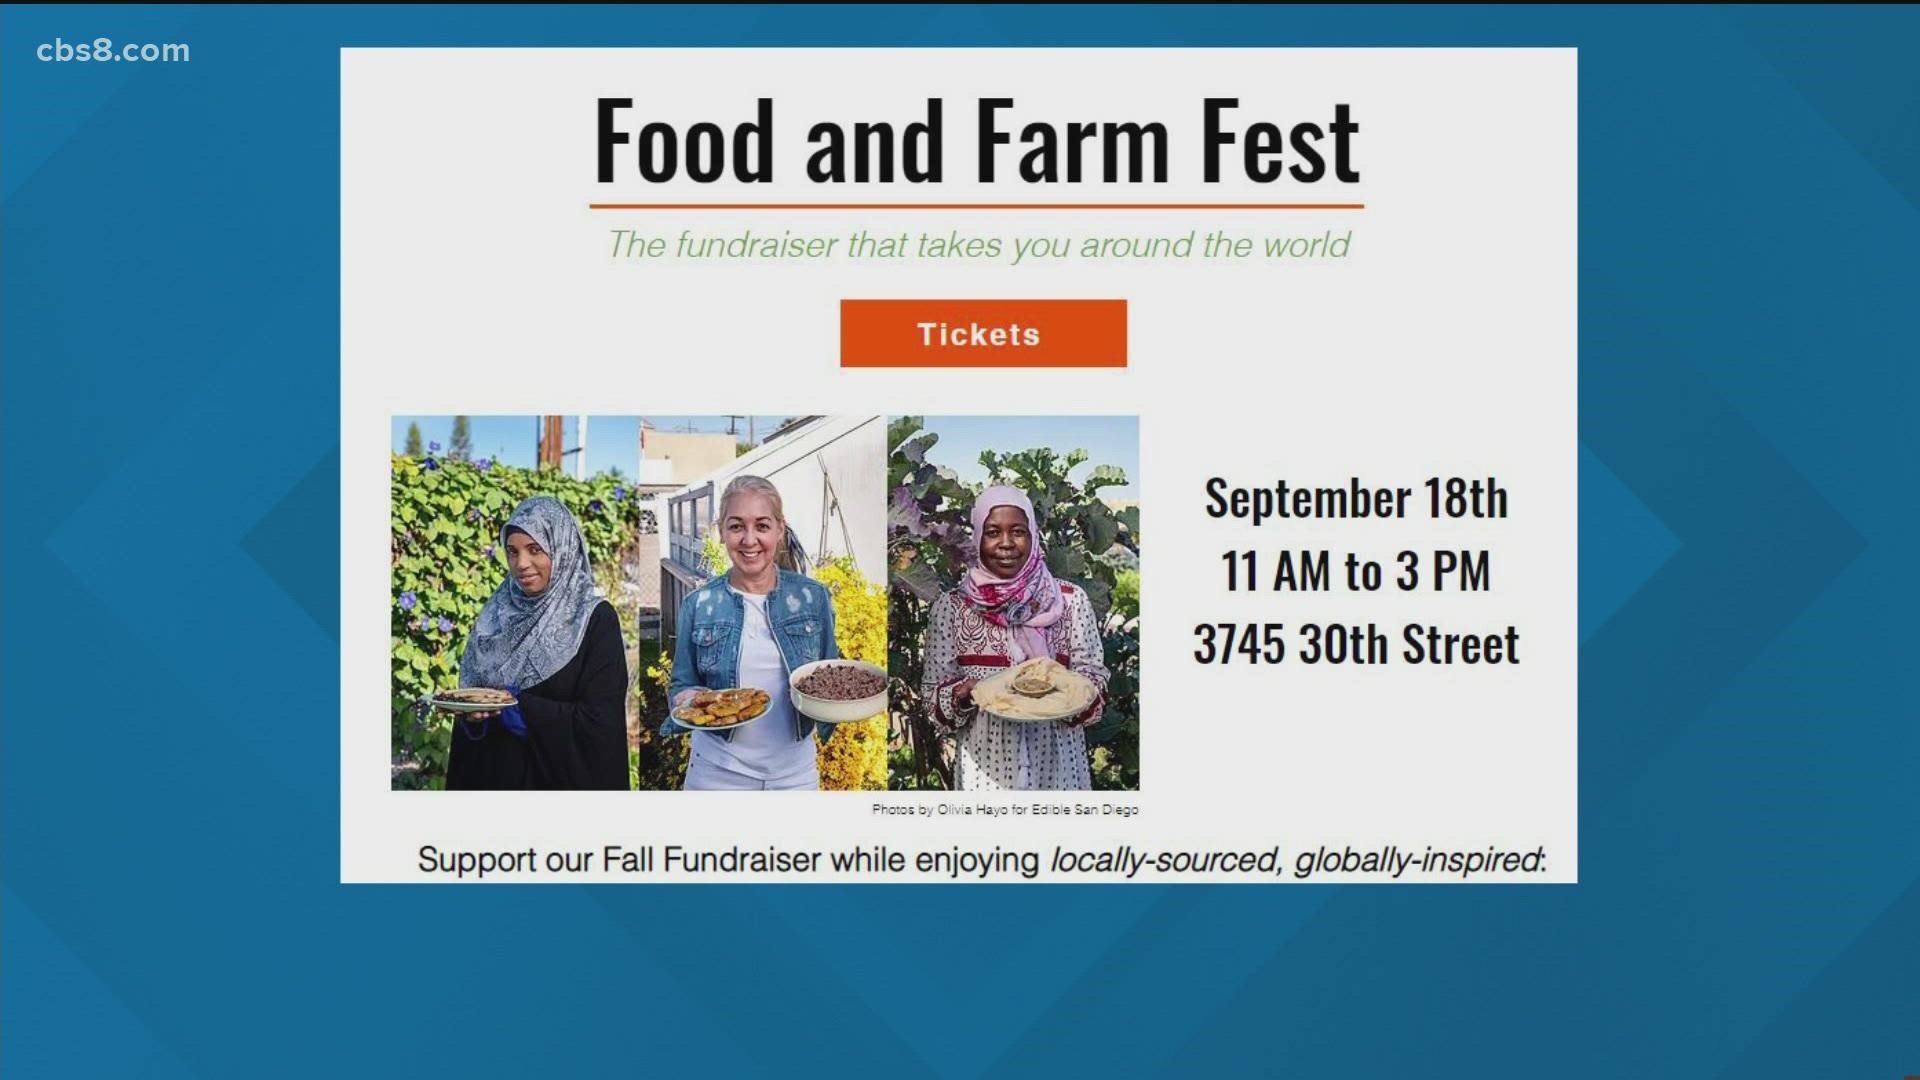 You have a chance this weekend to take your taste buds around the world at the Food and Farm Fest benefitting MAKE Projects.